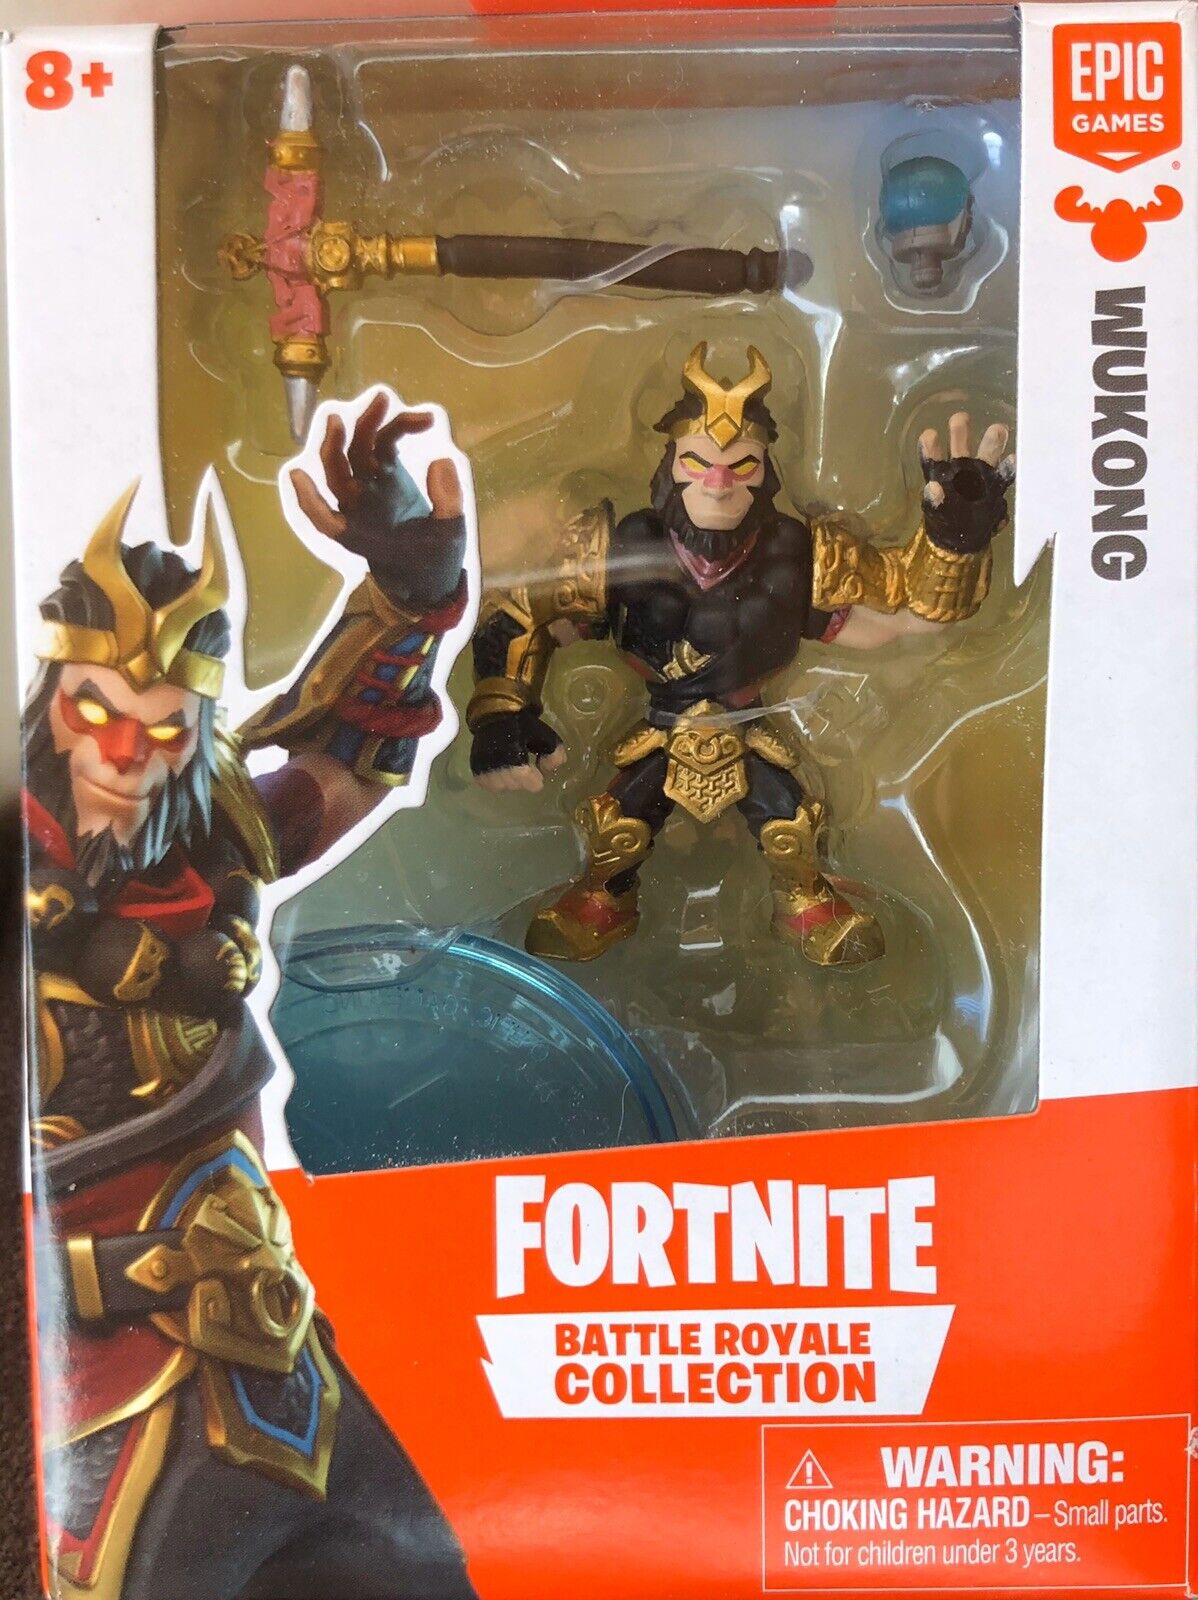 Fortnite Battle Royale Collection WUKONG